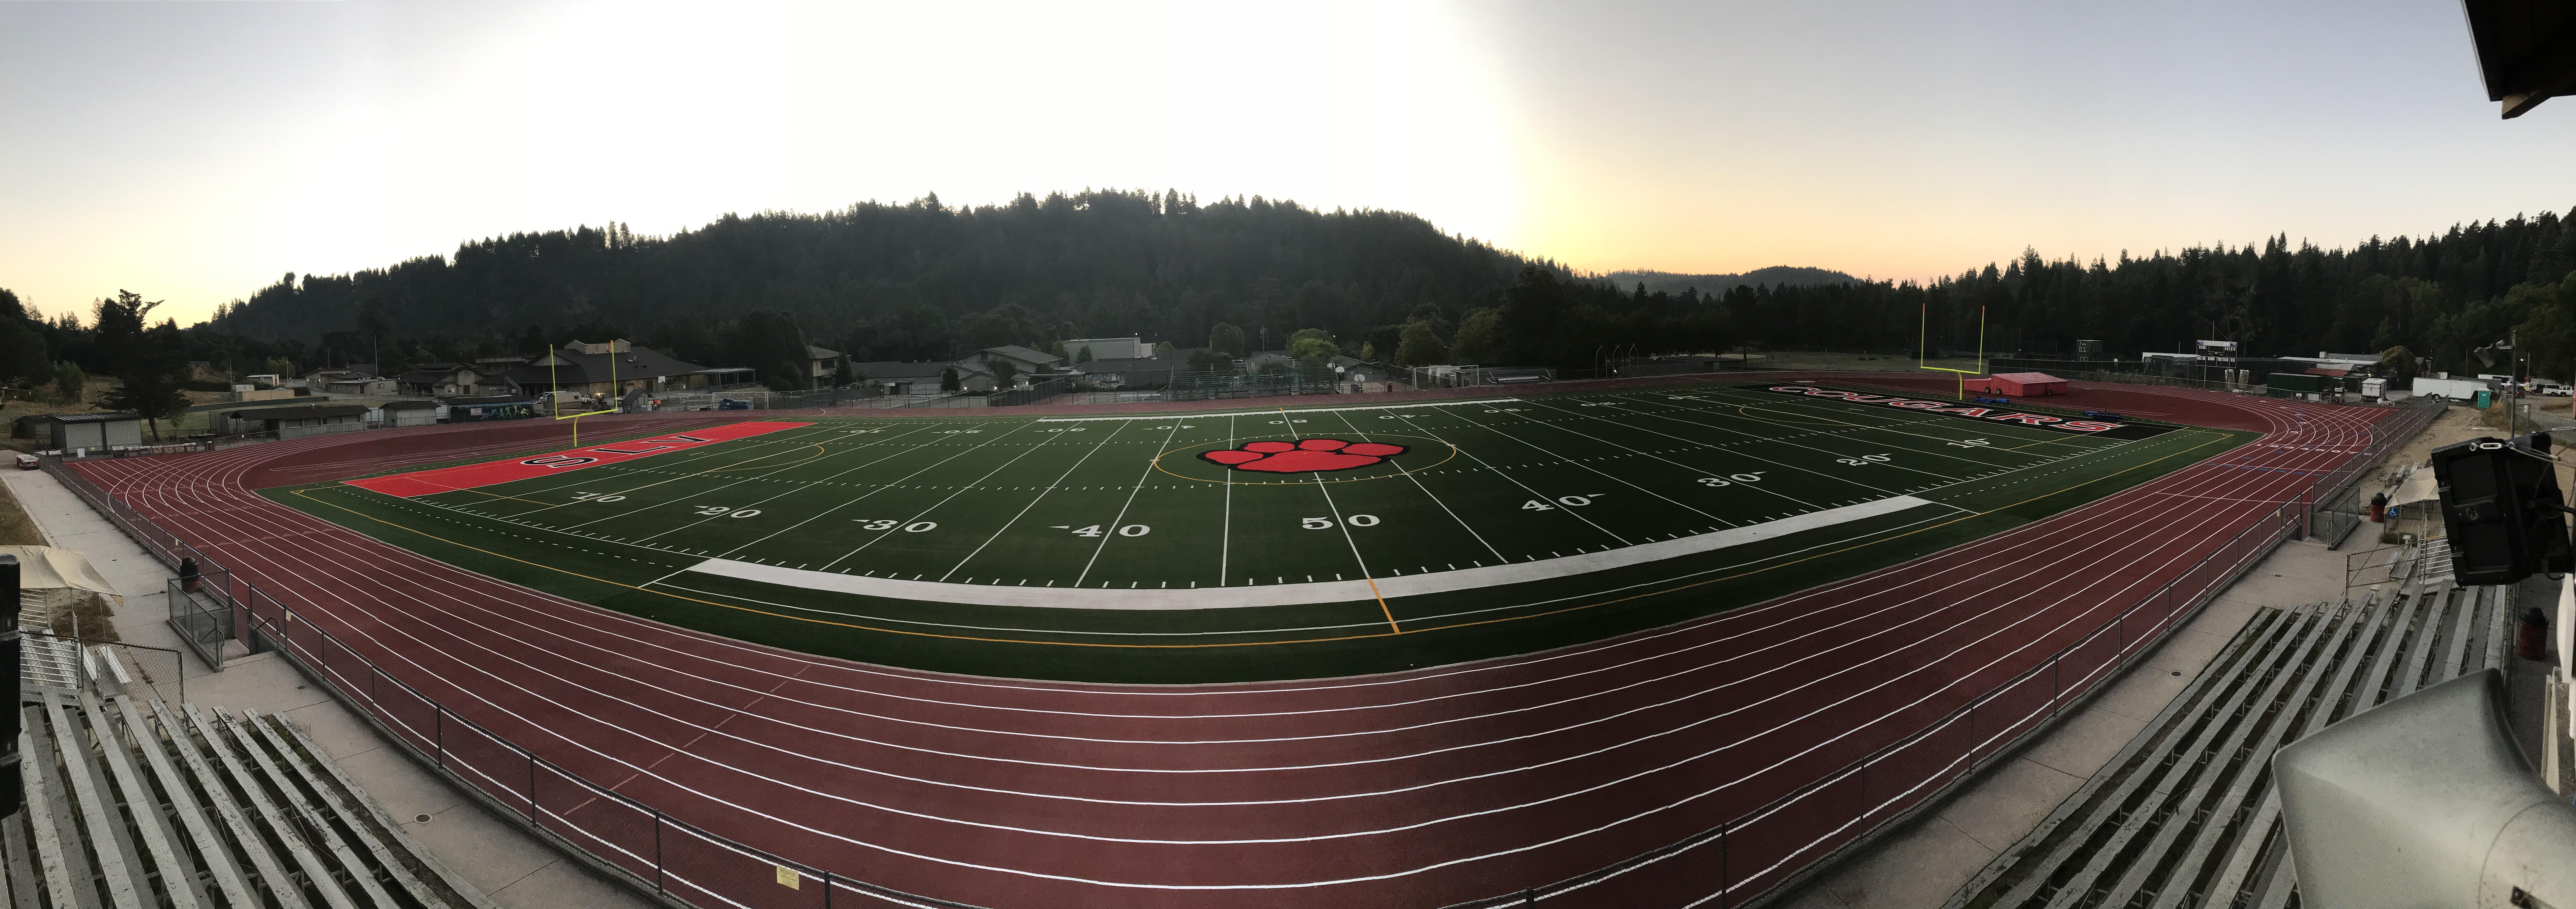 Pic of SLVHS turf field